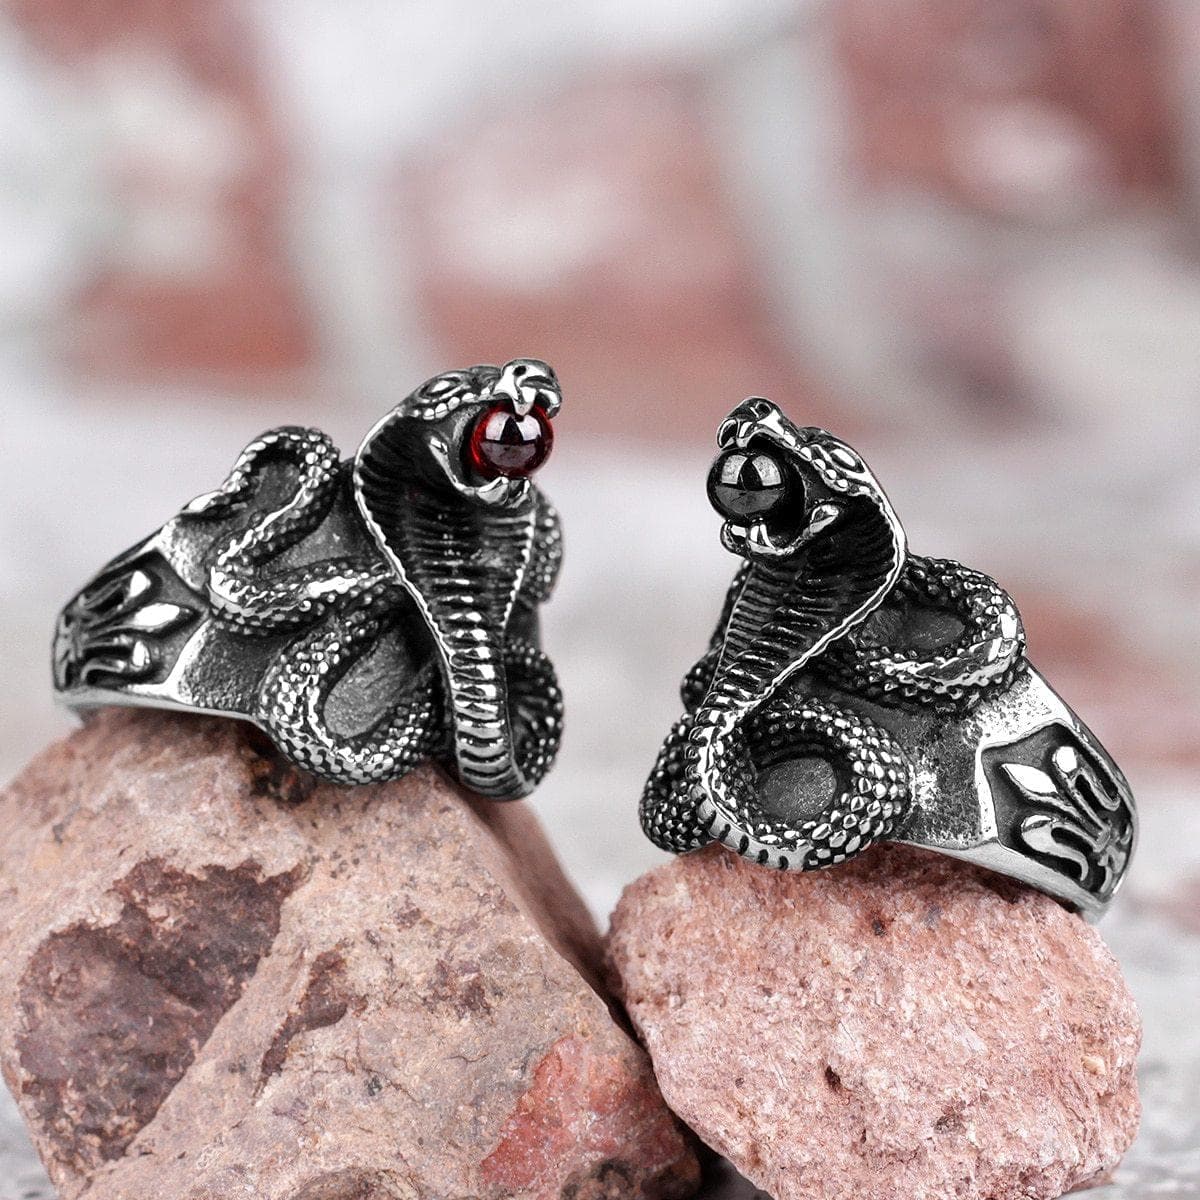 Rings Stainless Steel Men Rings Cobra Snake Animal Punk Rock Hip Hop for Biker Male Boyfriend Jewelry Creativity Gift Wholesale|Rings| Ancient Treasures Ancientreasures Viking Odin Thor Mjolnir Celtic Ancient Egypt Norse Norse Mythology